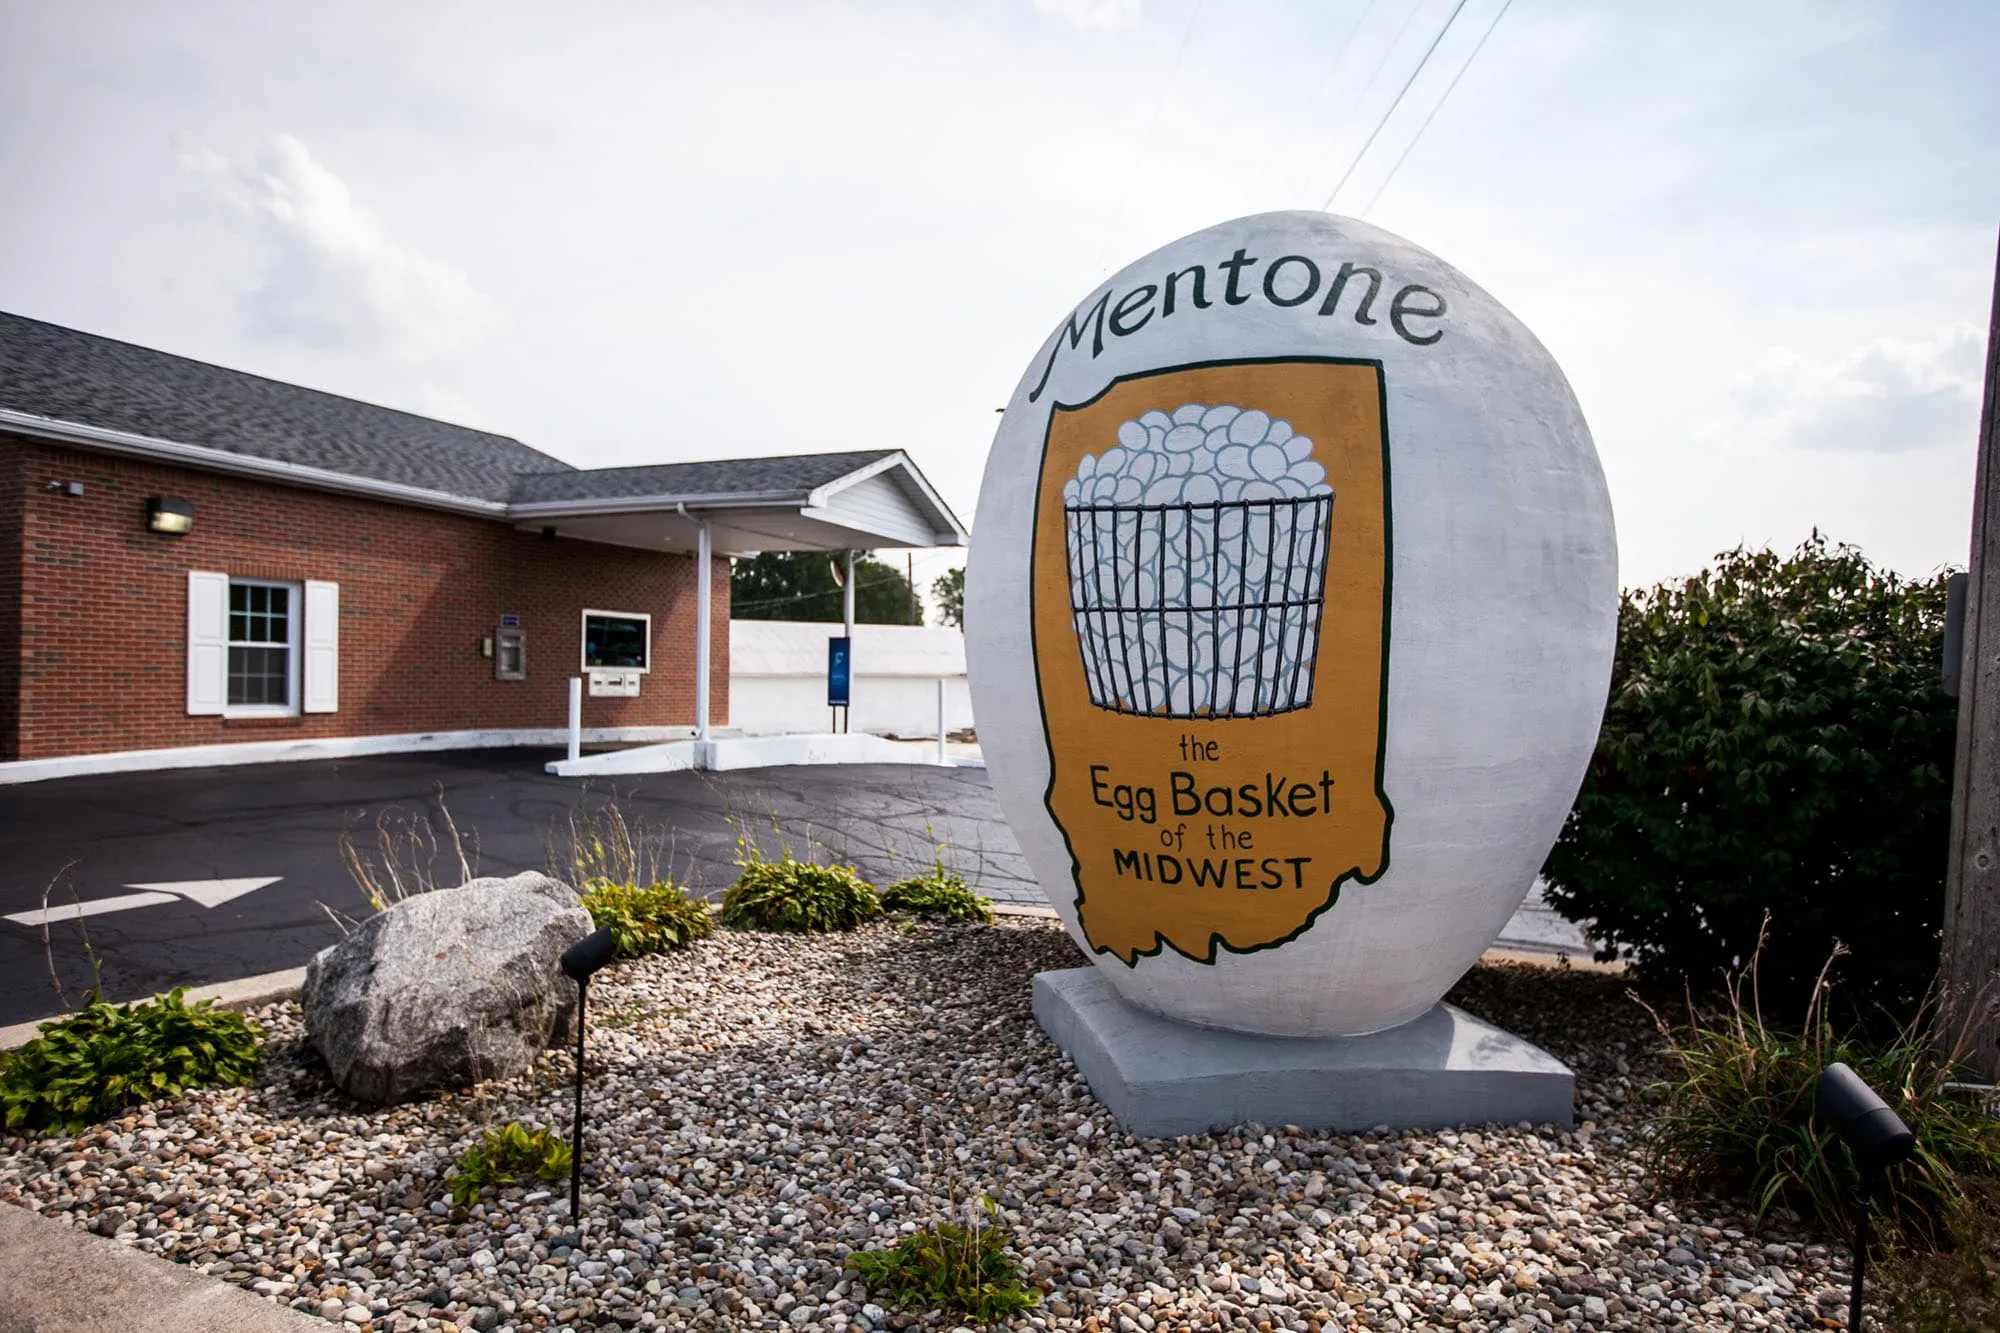 World’s Largest Egg in Mentone, Indiana